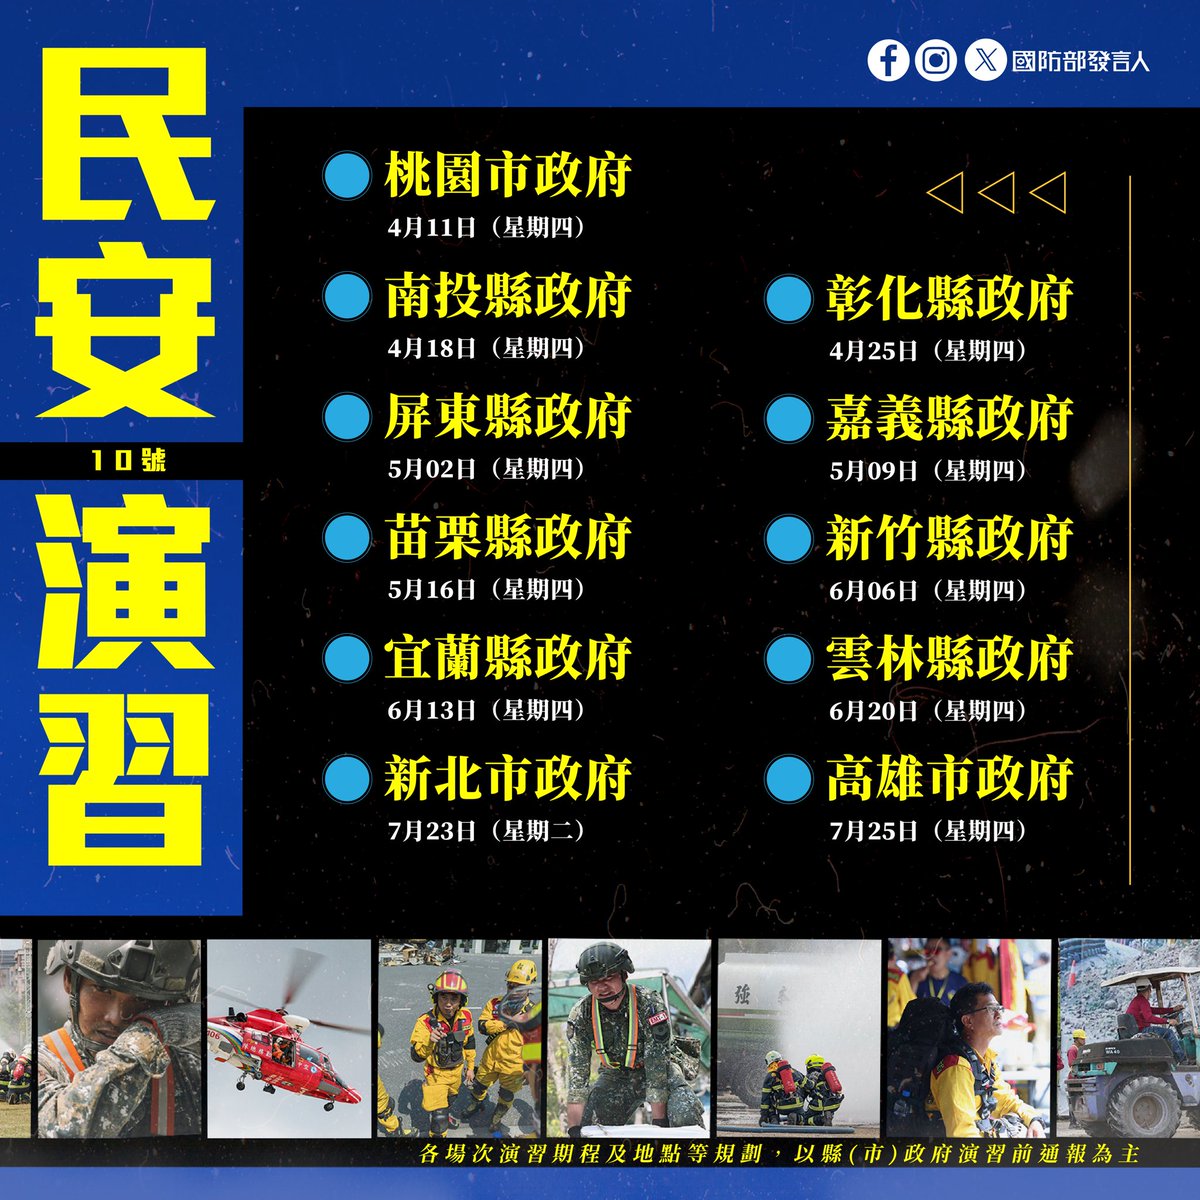 Min-An 10th mobilization/disaster relief exercises are to be held by local governments from April through July. With first responders, the military, and NGOs participating, Min-An will give our local governments a good chance to review how sound the emergency response plans are.